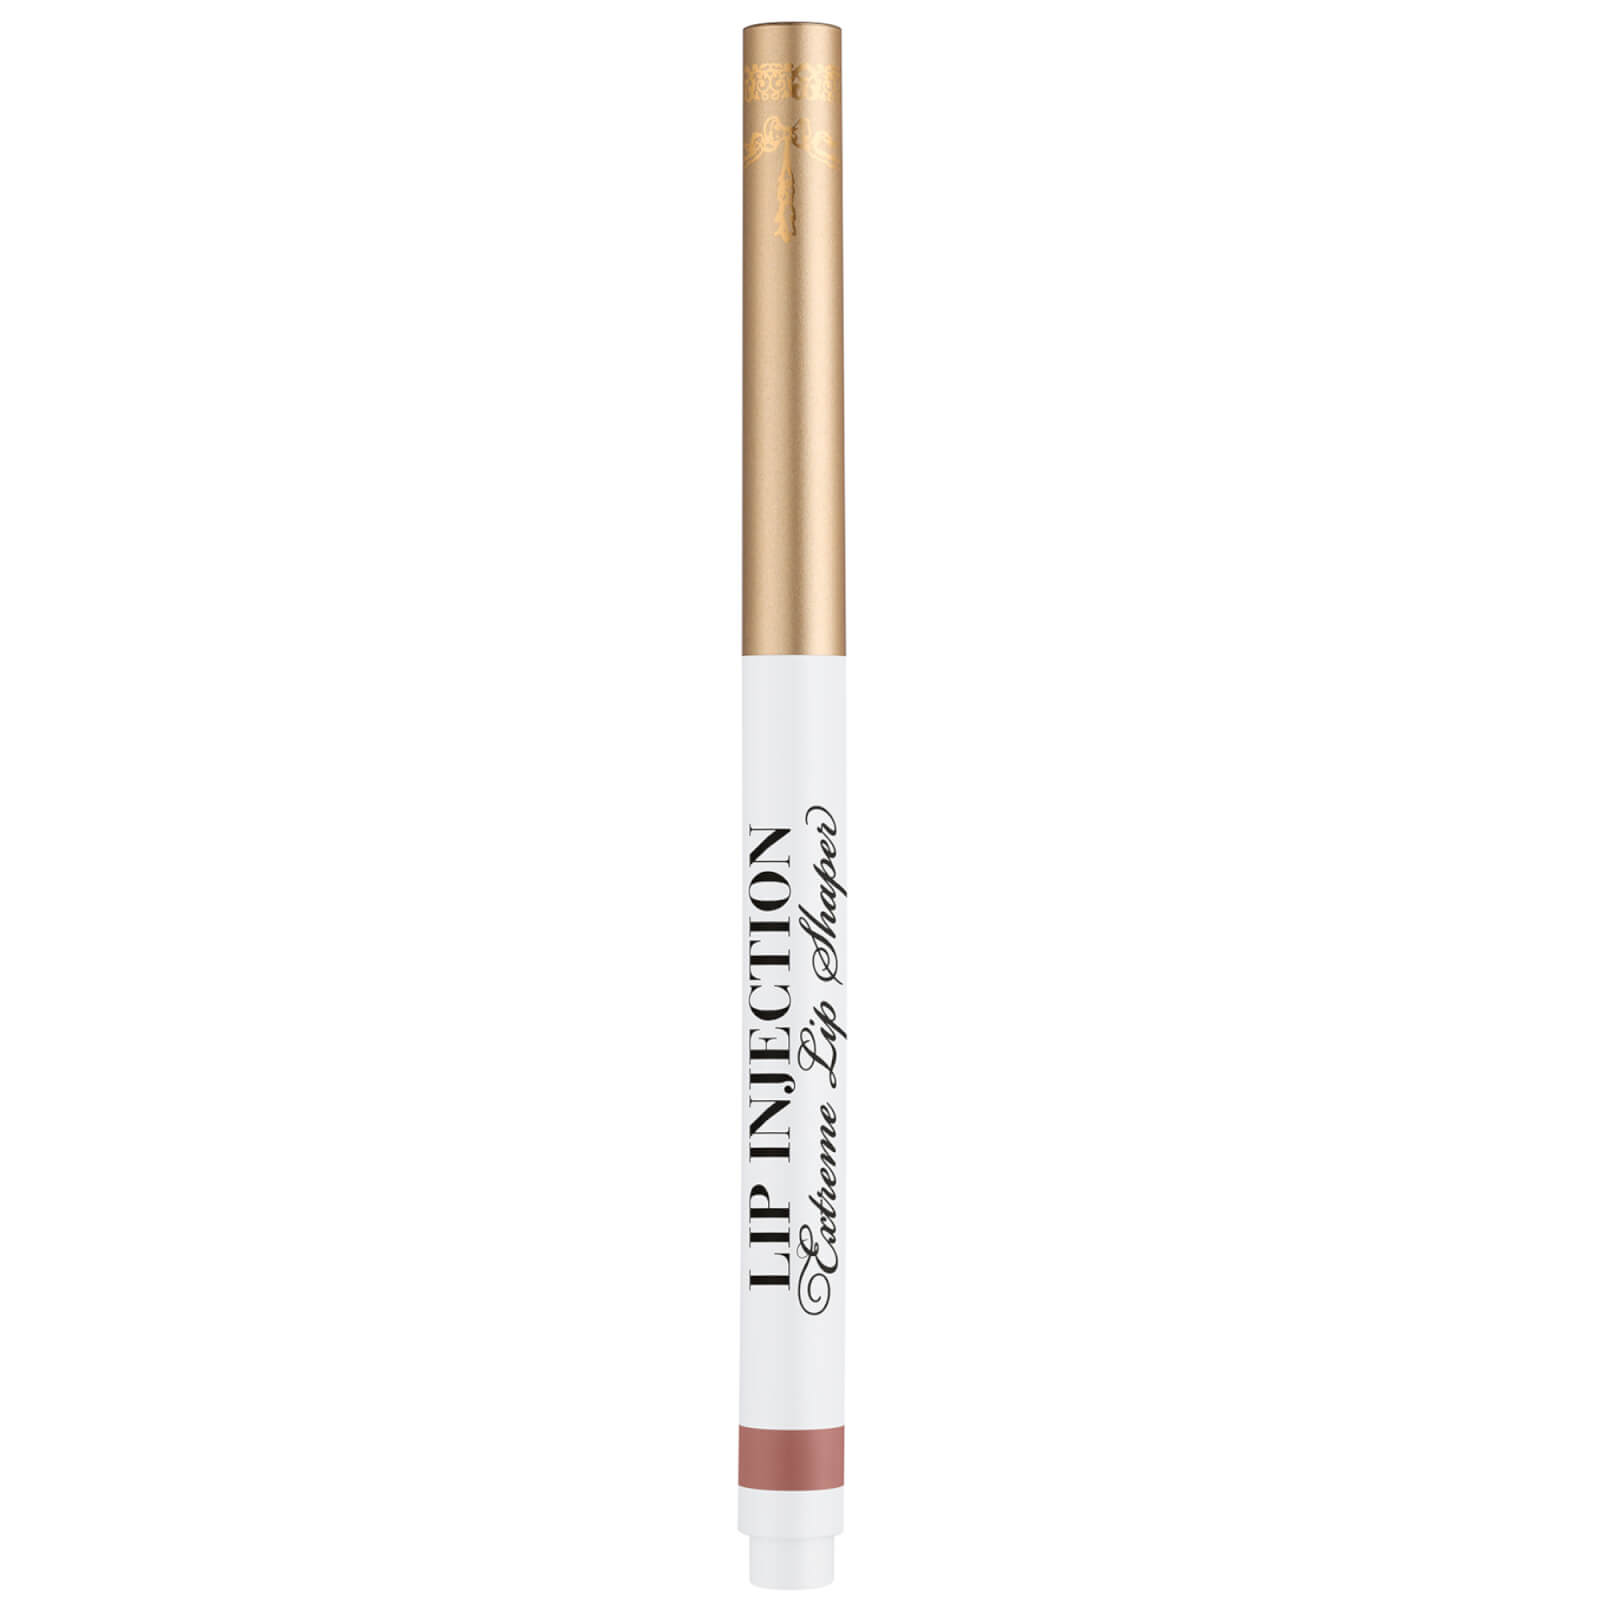 Too Faced Lip Injection Extreme Lip Shaper 0.23g (Various Shades) - Puffy Nude